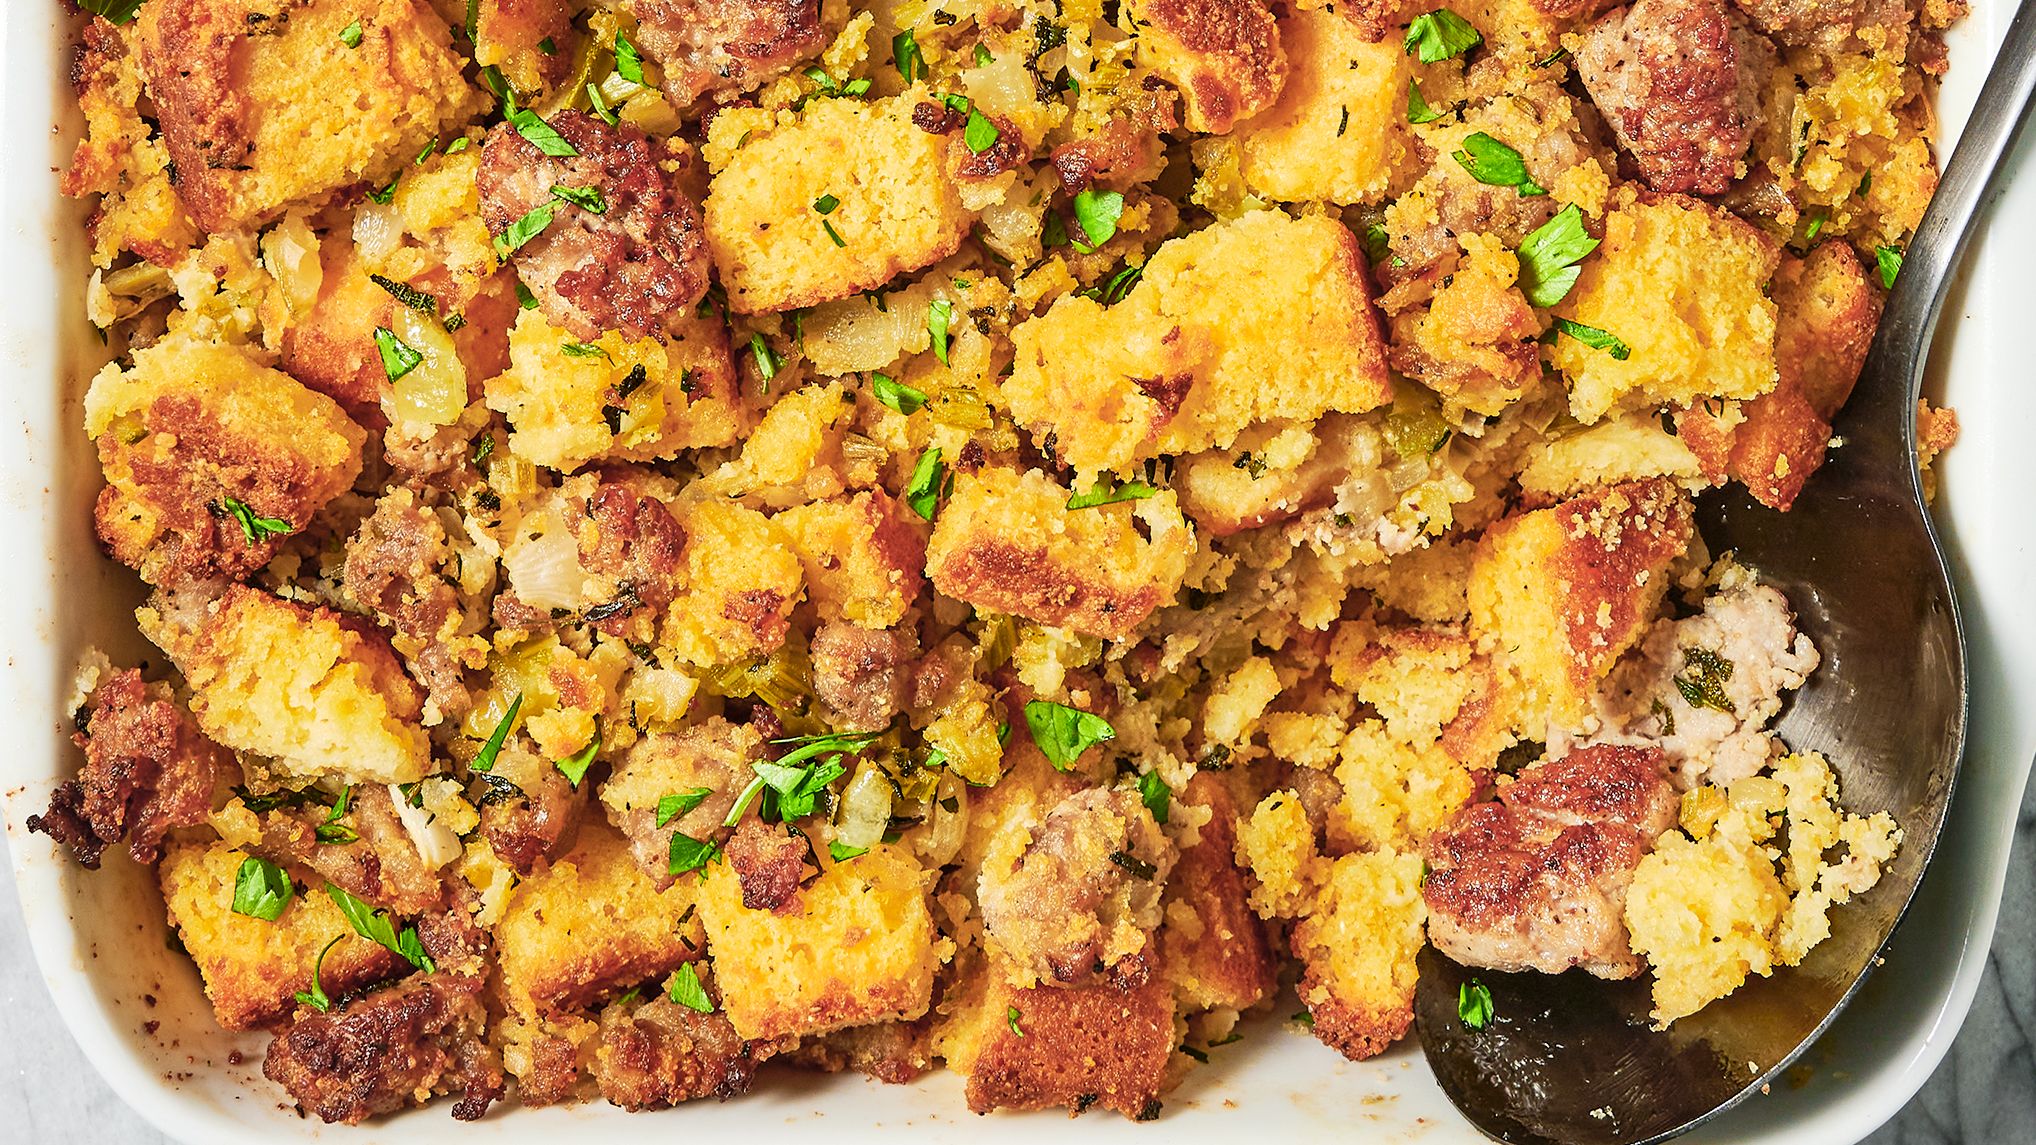 Best Cornbread and Sausage Stuffing Recipe - How to Make Stuffing